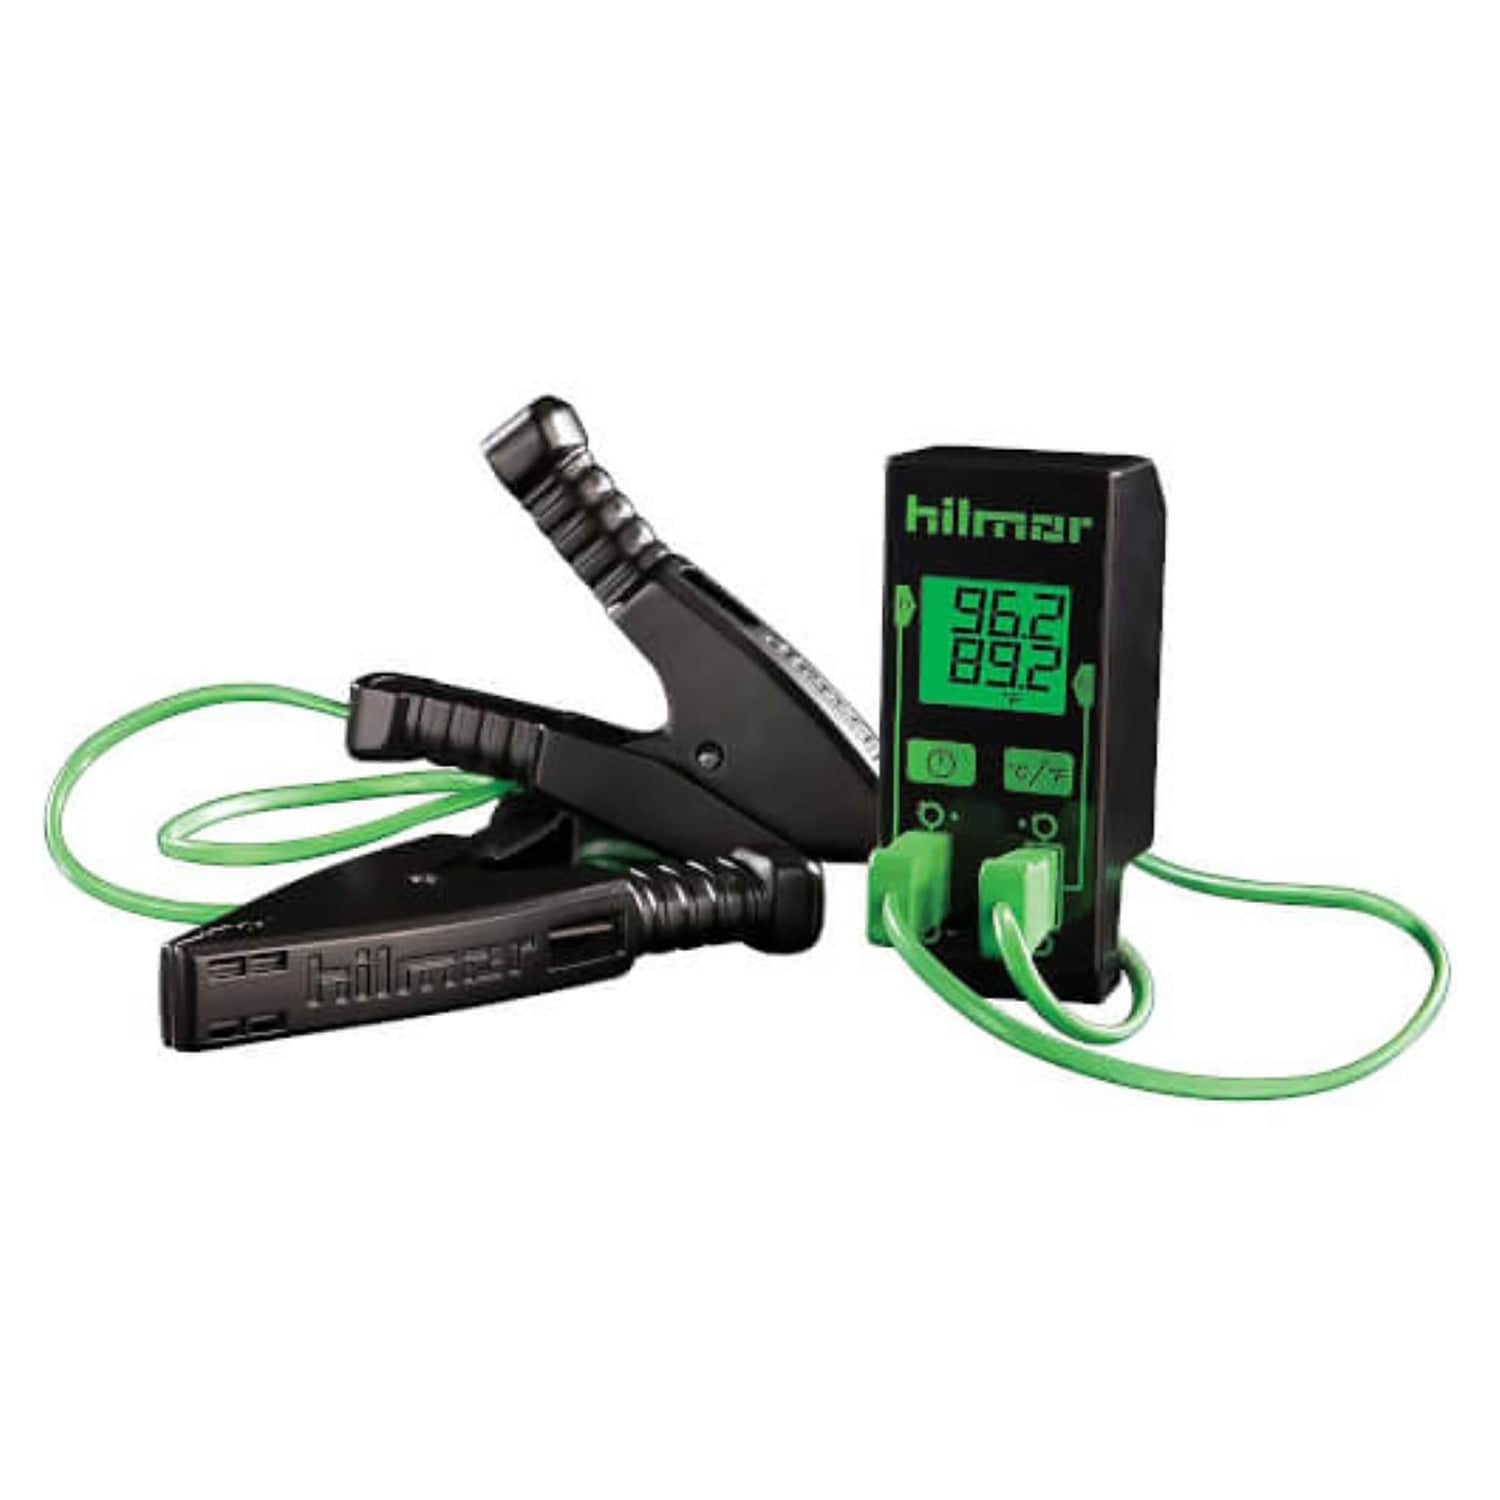 Hilmor 1839106 DROT2TCC Dual Readout Thermometer & Clamps